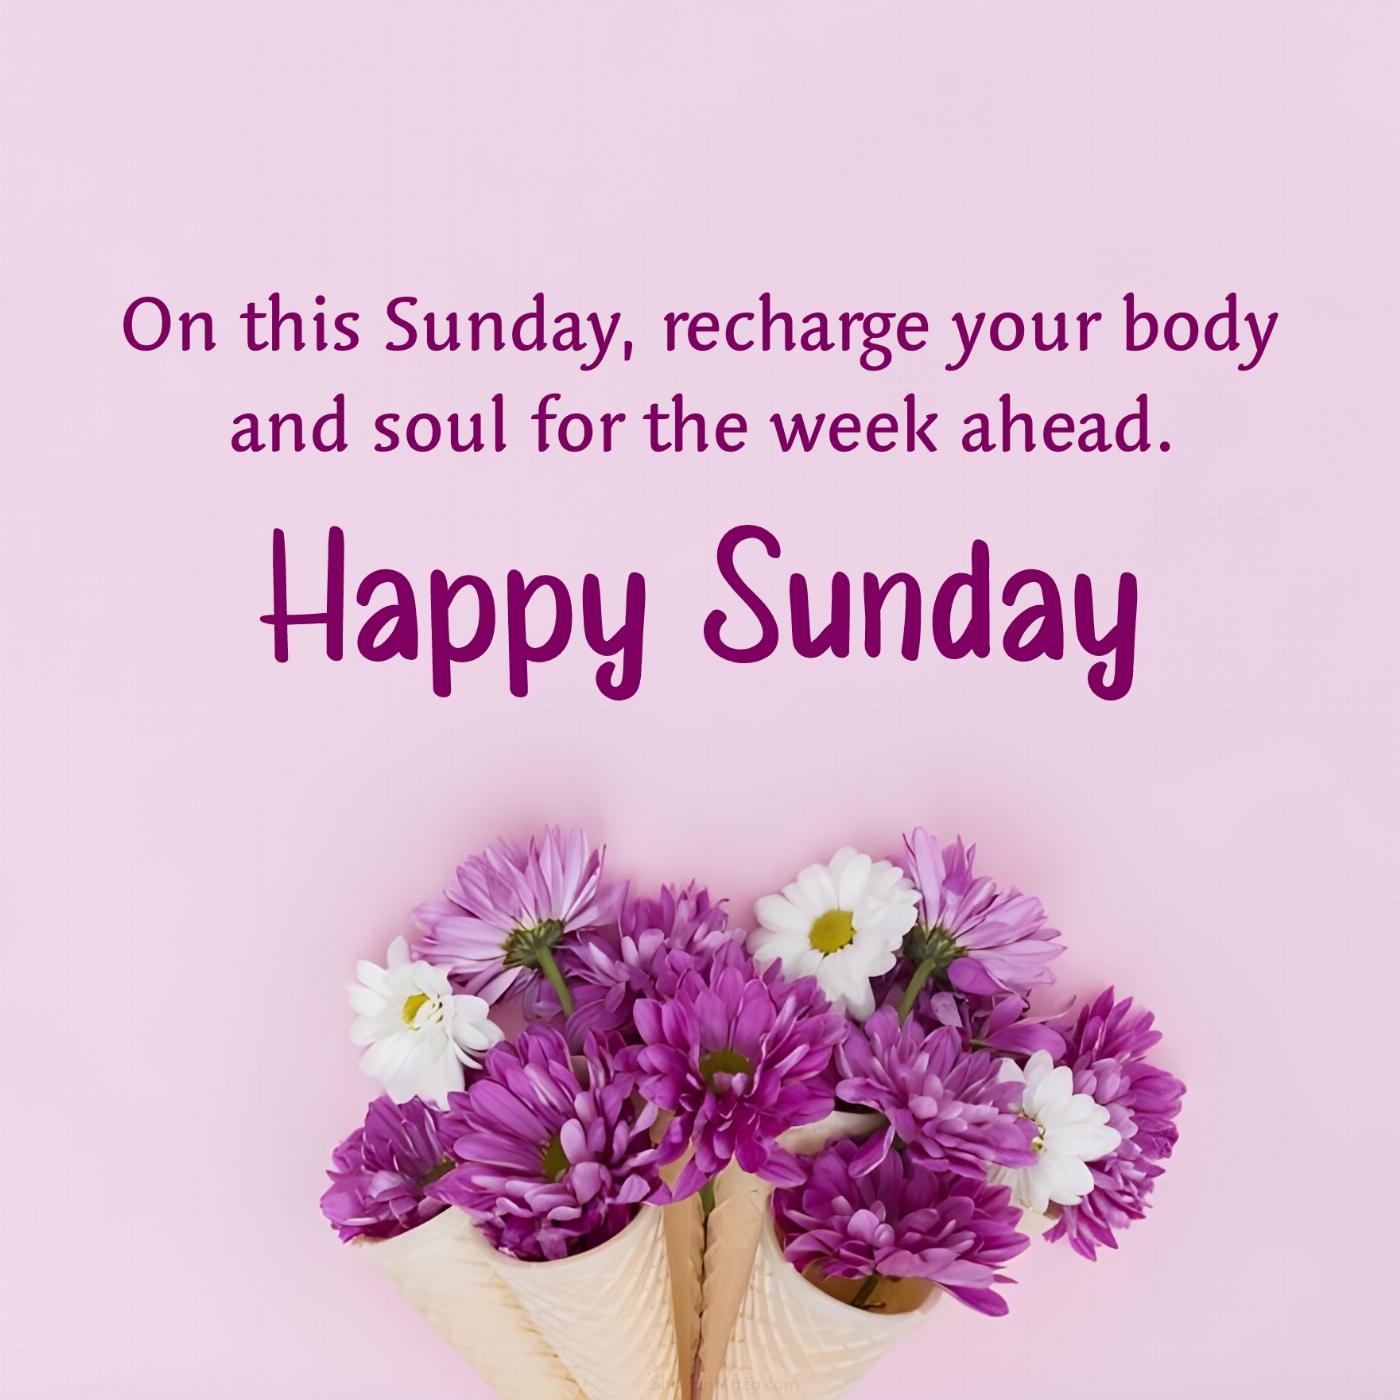 On this Sunday recharge your body and soul for the week ahead